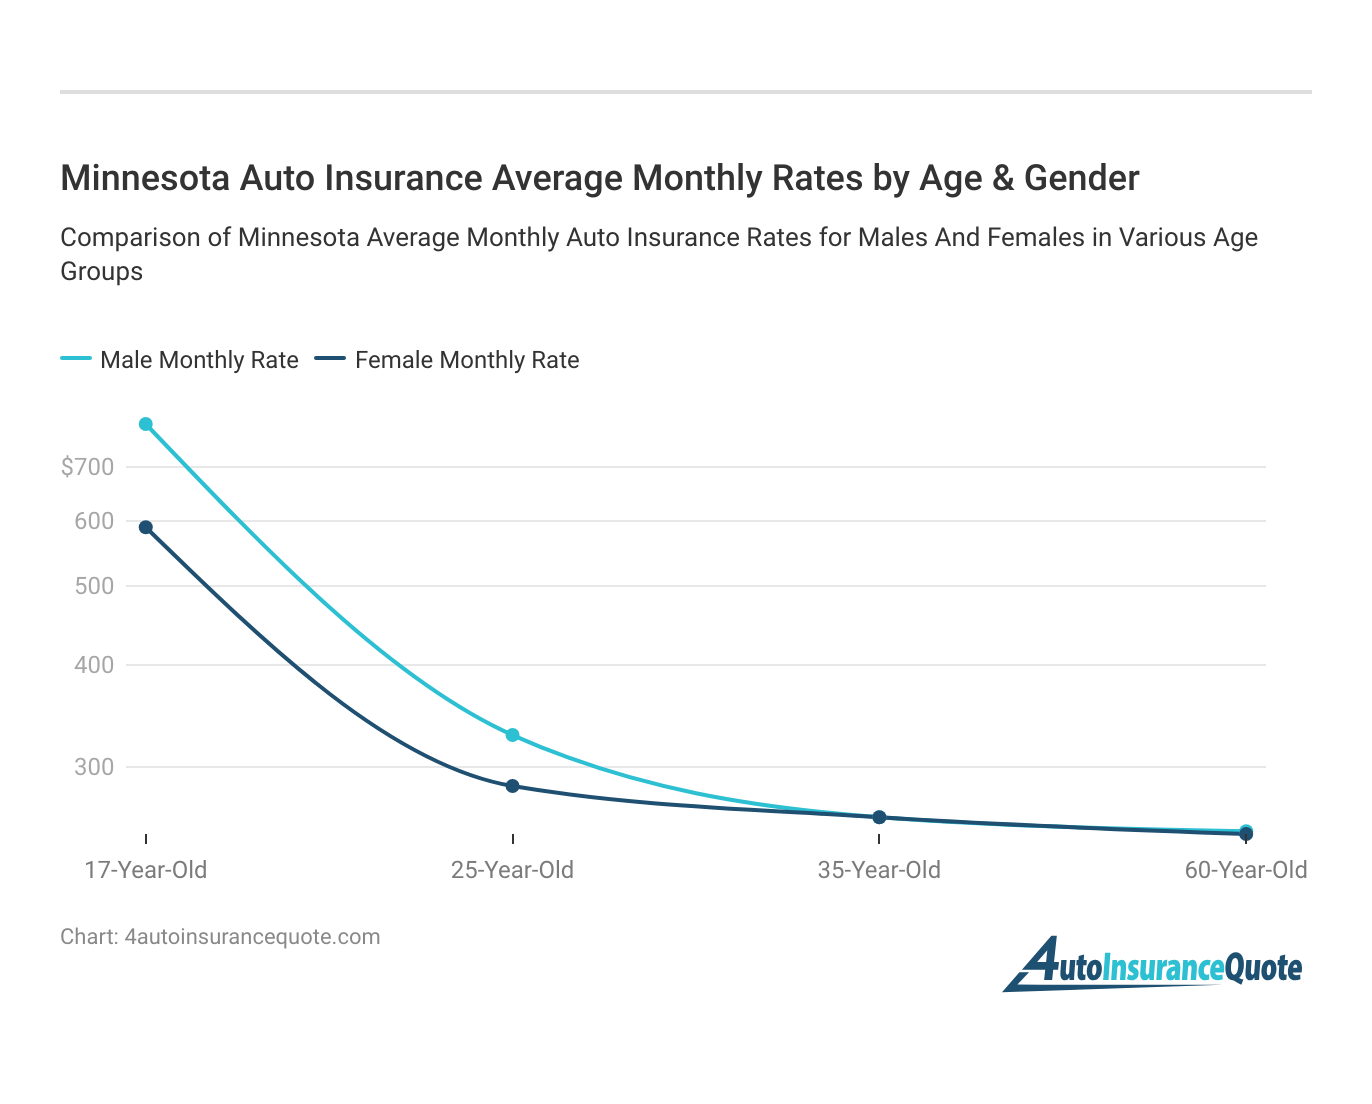 <h3>Minnesota Auto Insurance Average Monthly Rates by Age & Gender</h3>